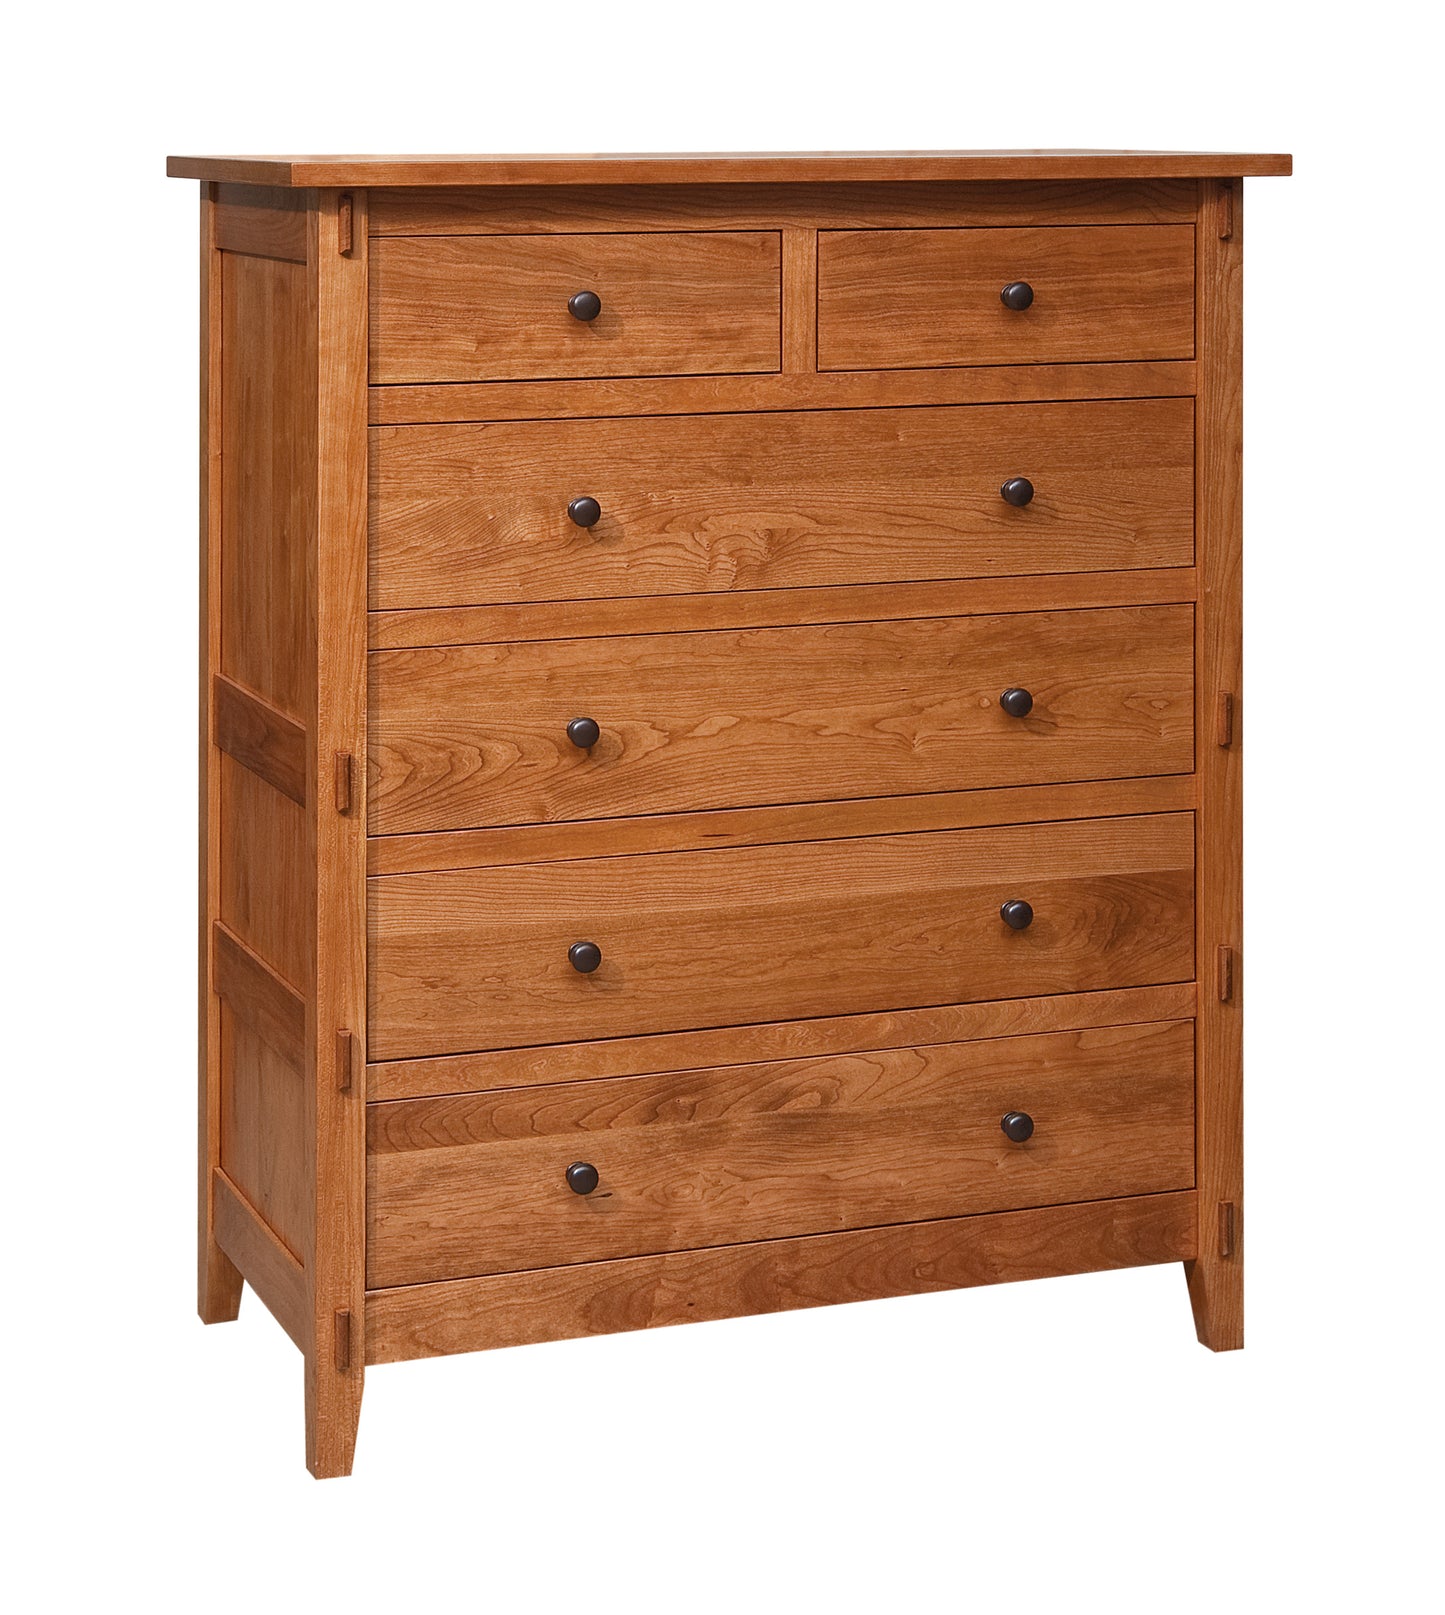 Bungalow 6-Drawer Chest